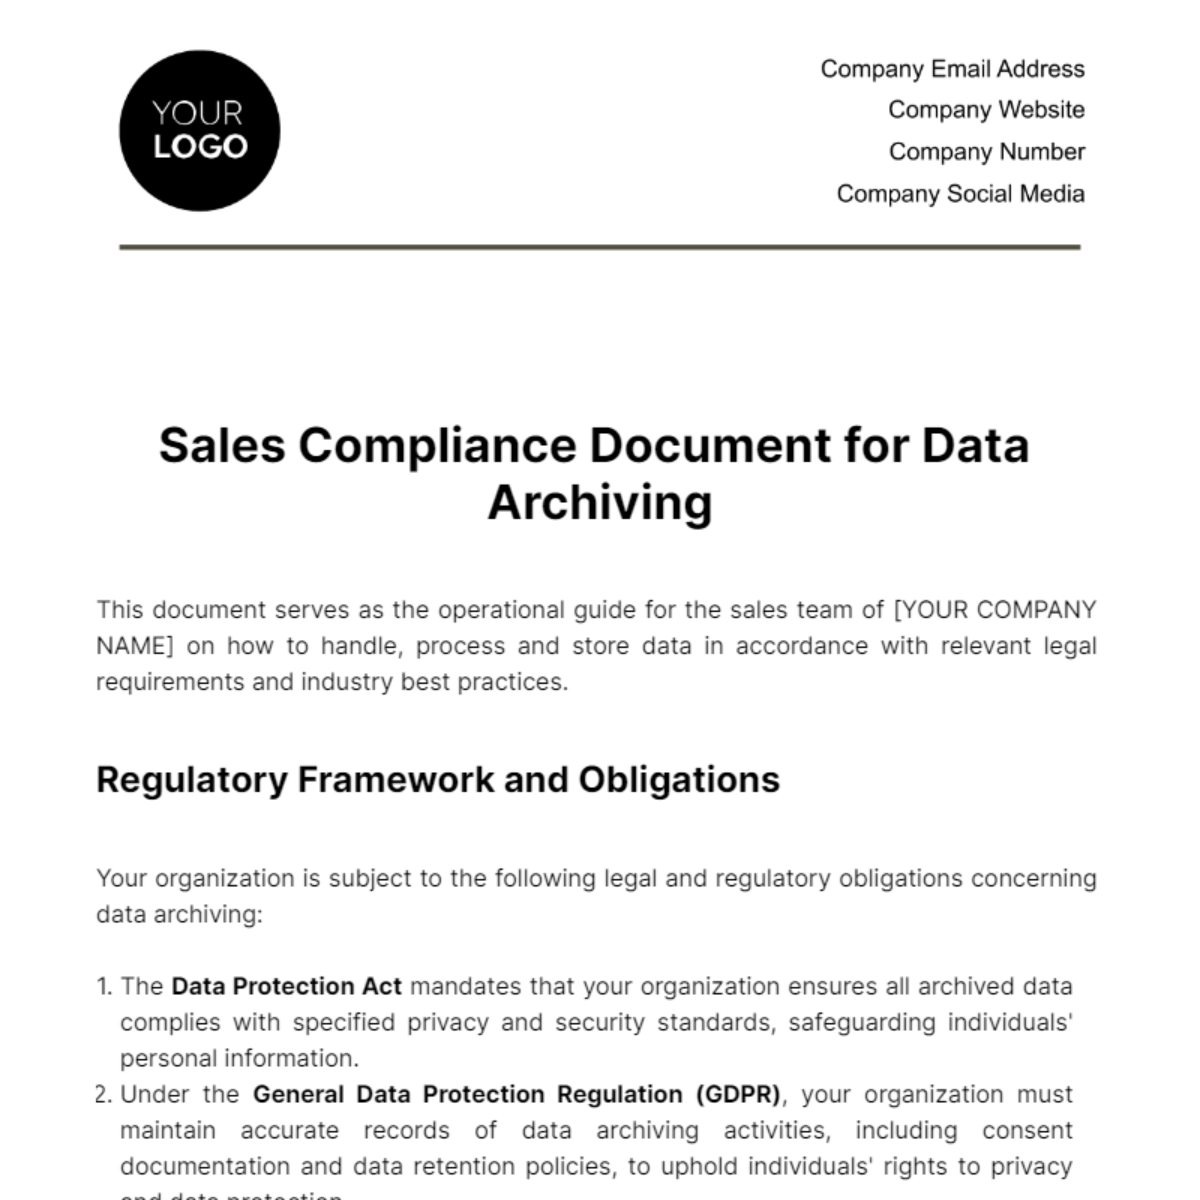 Sales Compliance Document for Data Archiving Template